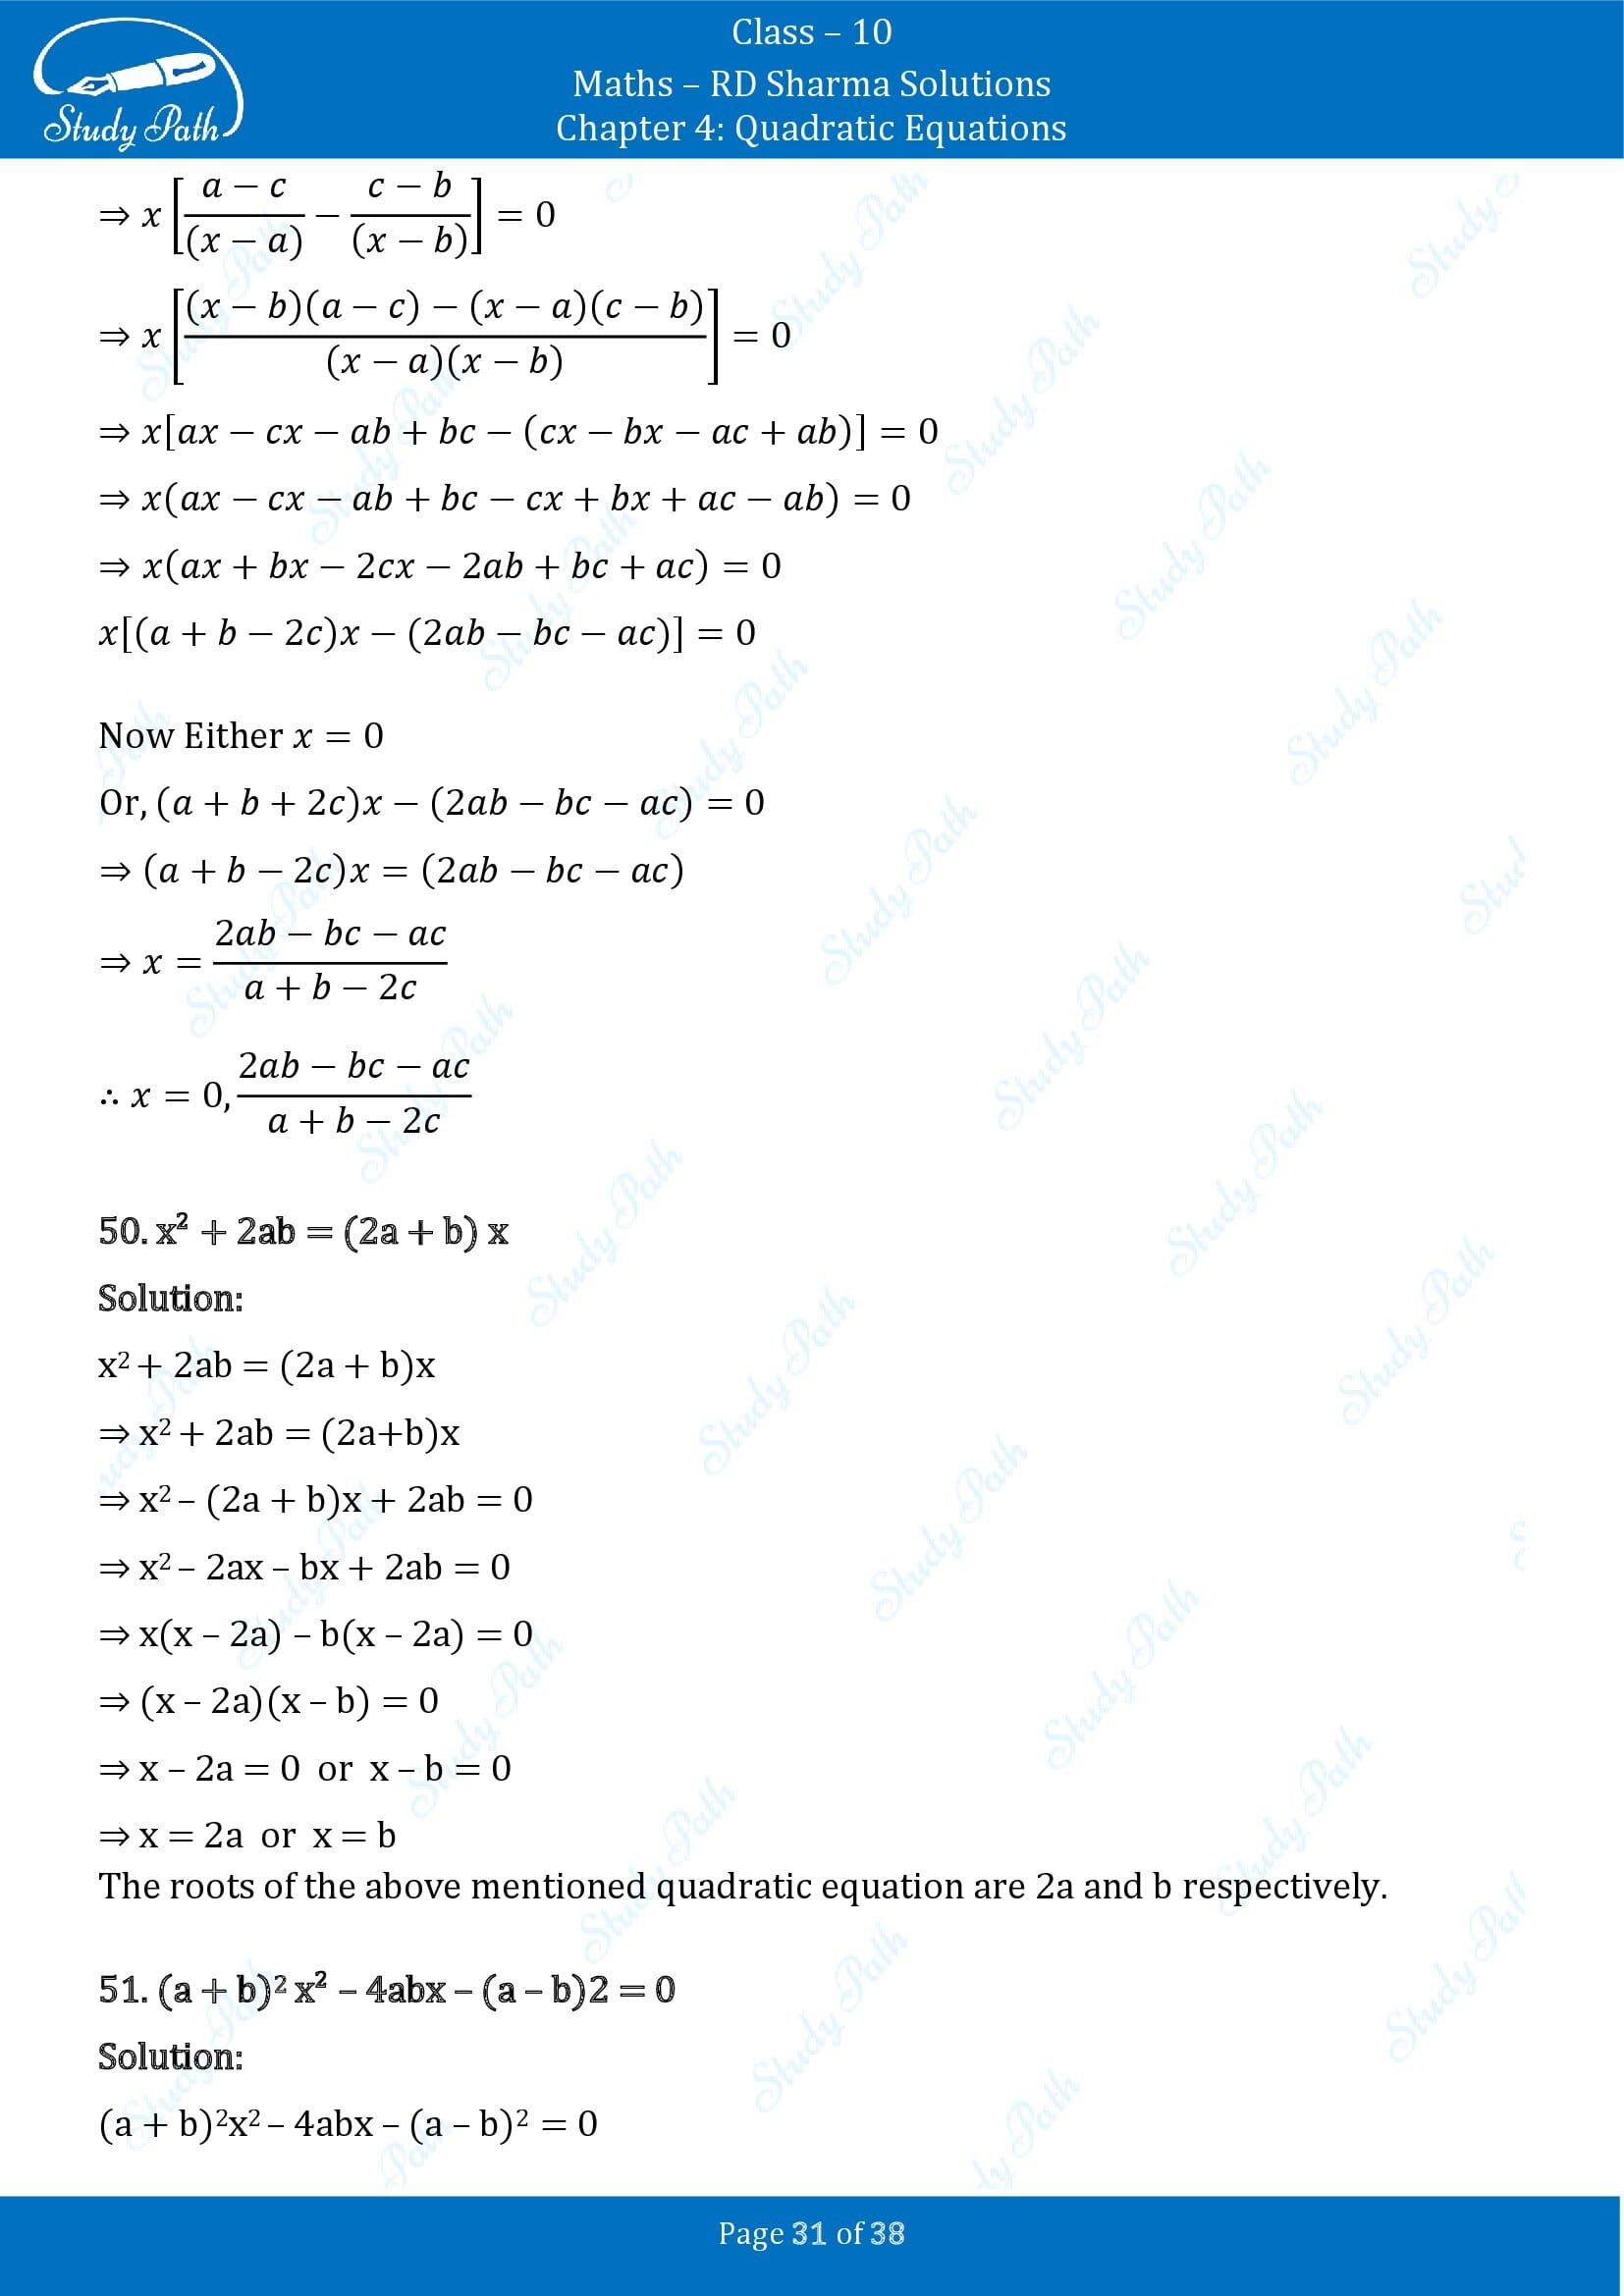 RD Sharma Solutions Class 10 Chapter 4 Quadratic Equations Exercise 4.3 00031